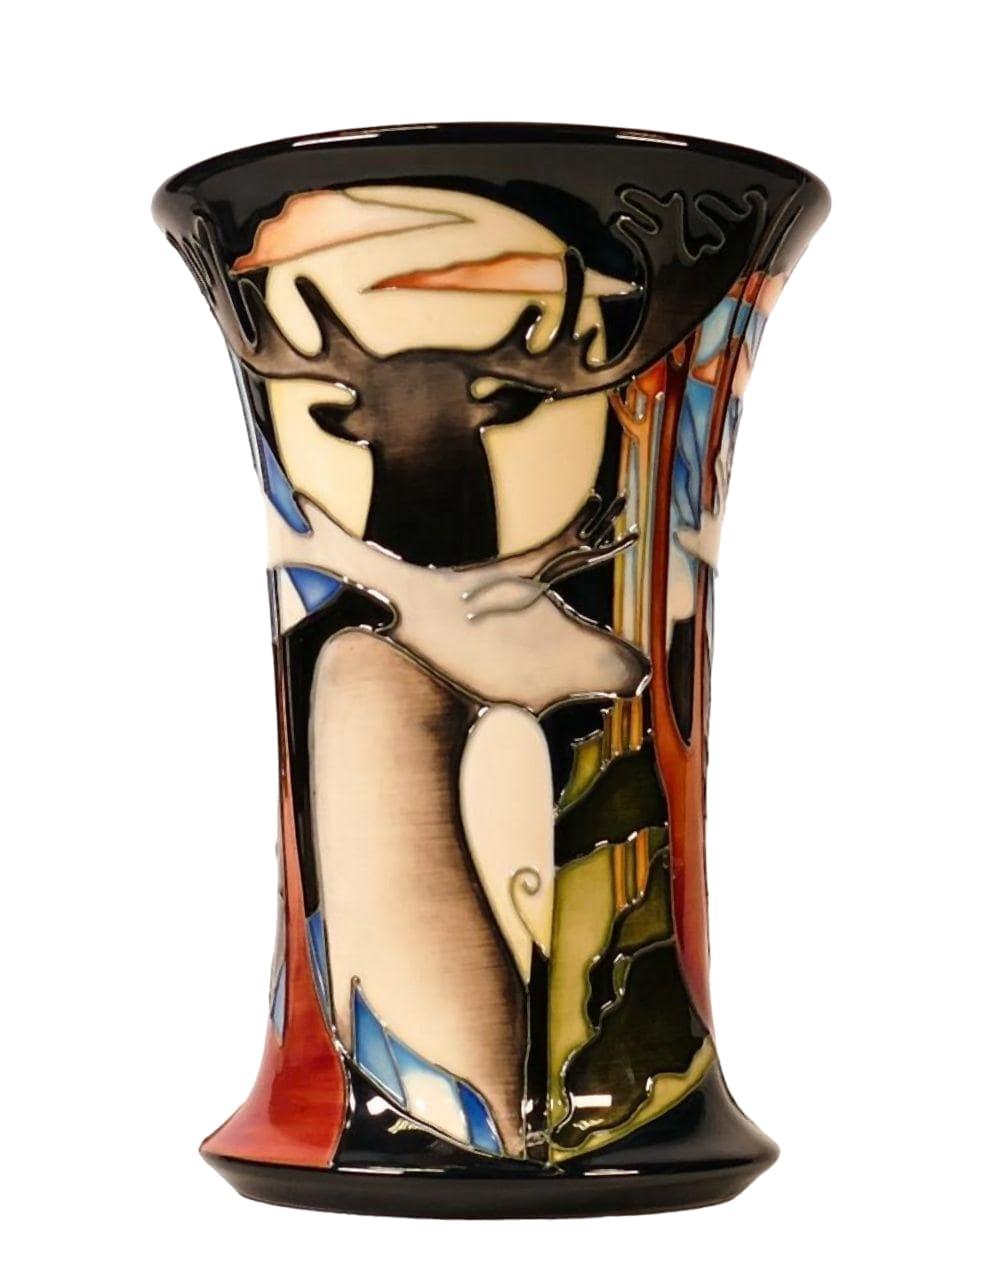 Designed by Emma Bossons and issued in a Limited Edition of only 35 Worldwide, as part of the 2012 Number 31 Collection catalogue. It is signed underglaze to the base by the designer.
Size: 8 inches tall

Good condition

